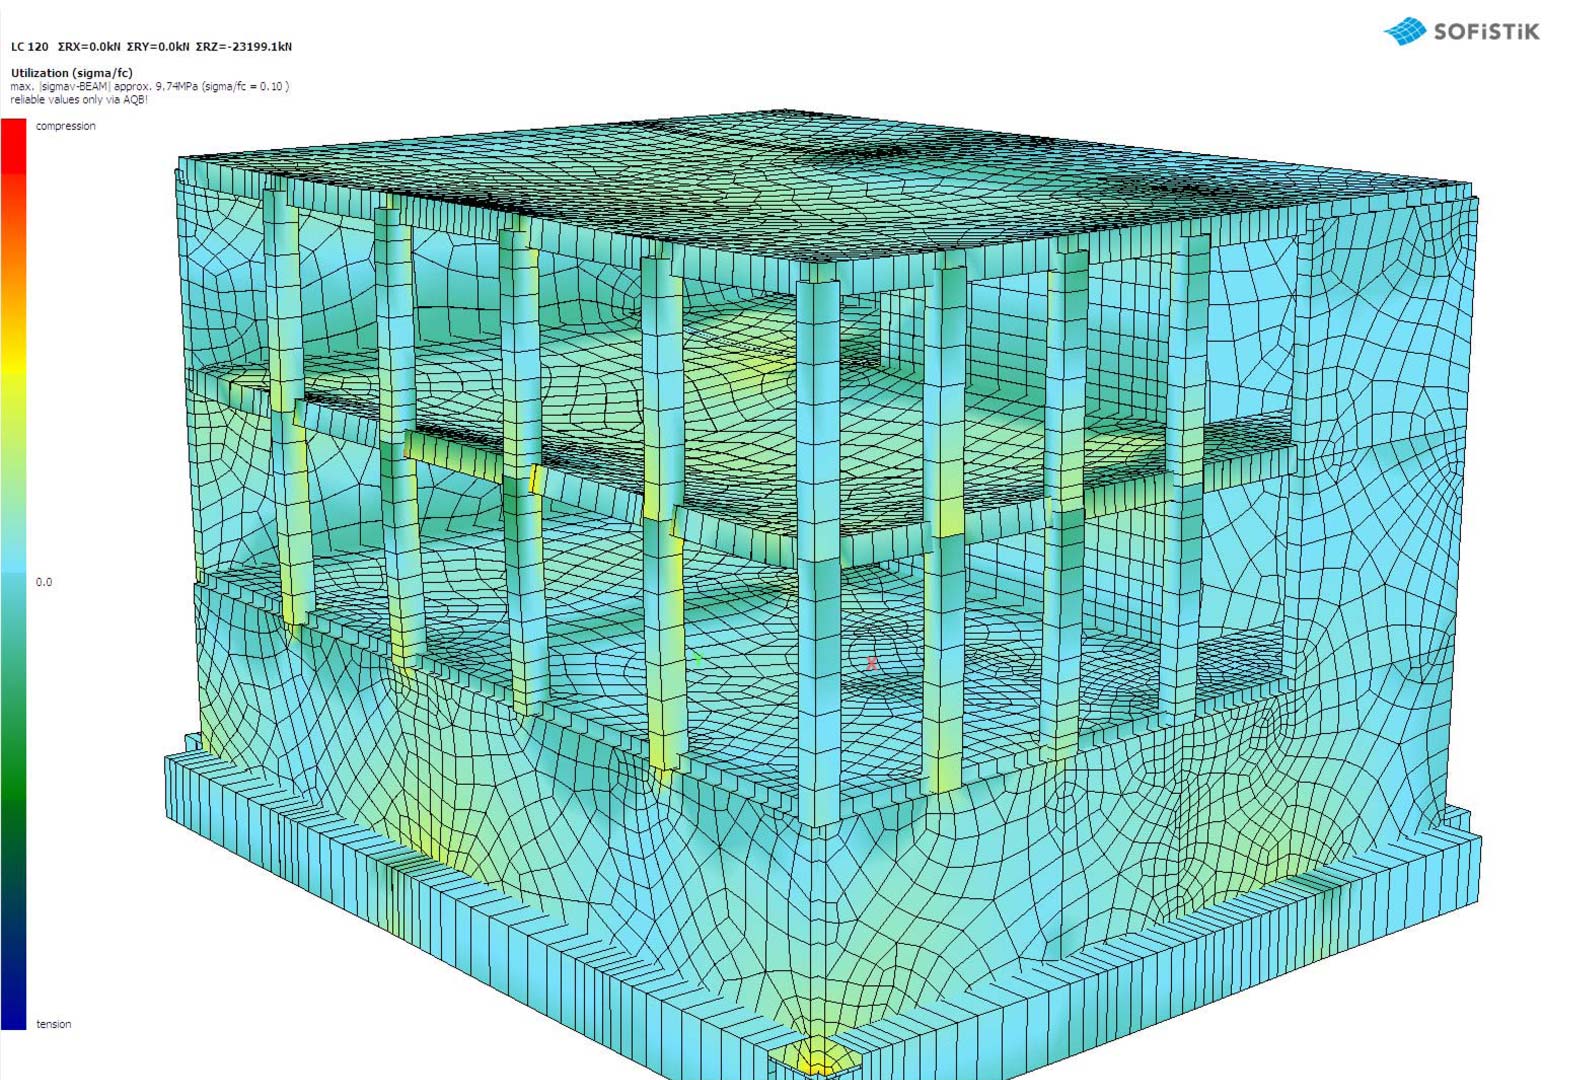 Building construction and building information modelling - SL Rasch benefits just as much from its many years of experience with interdisciplinary collaboration as it does from using the latest BIM environments.